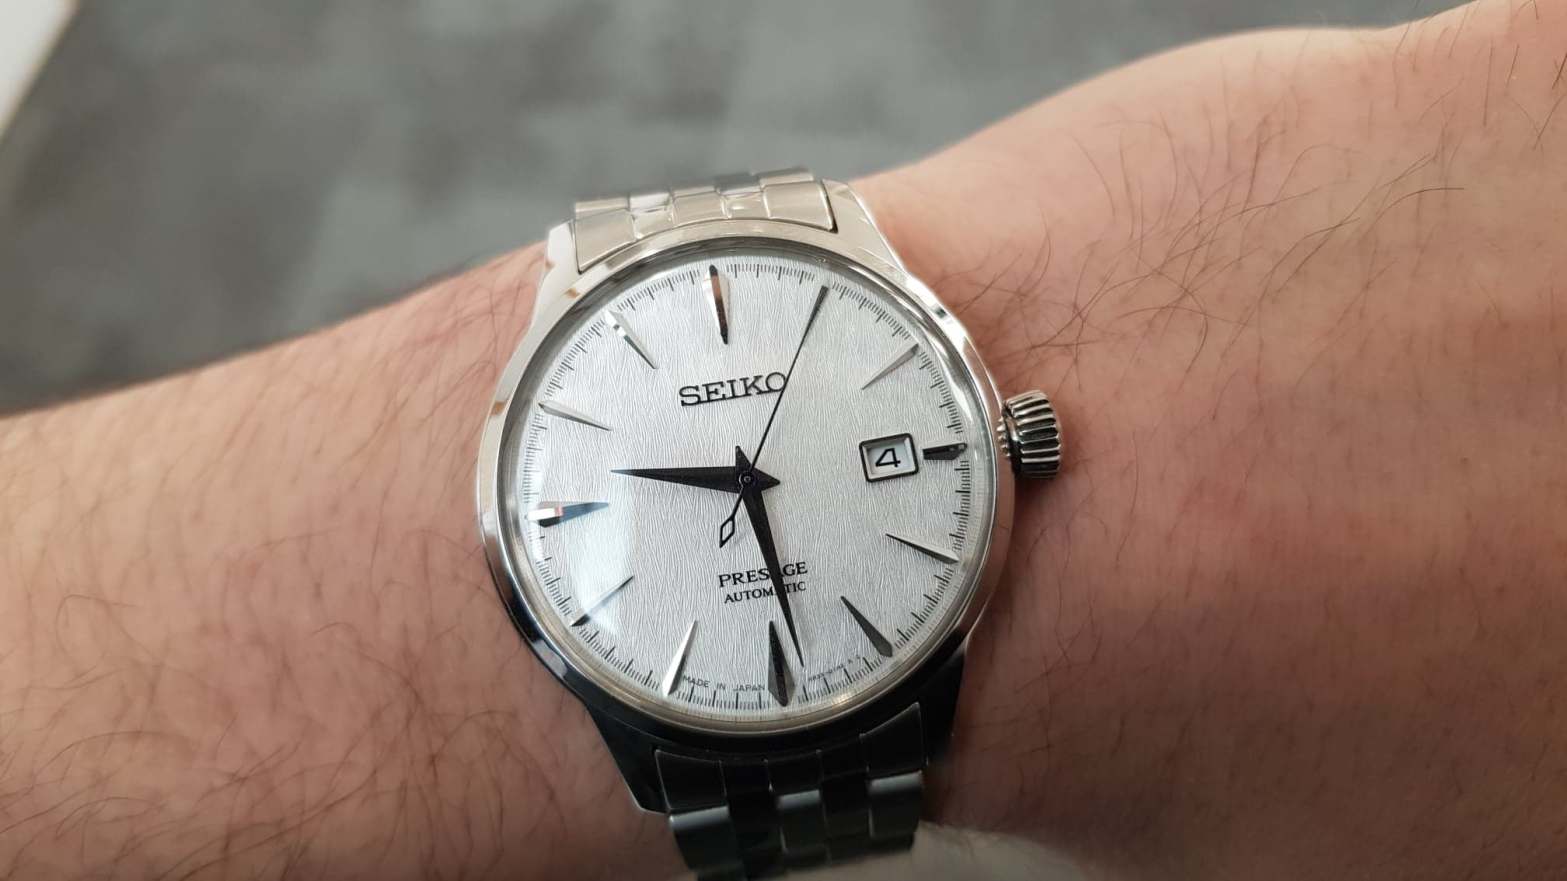 A Japanese snowflake, but not that one – Seiko Presage SRPC97J1  “Fuyugeshiki Cocktail” Limited Edition – The Column Wheel